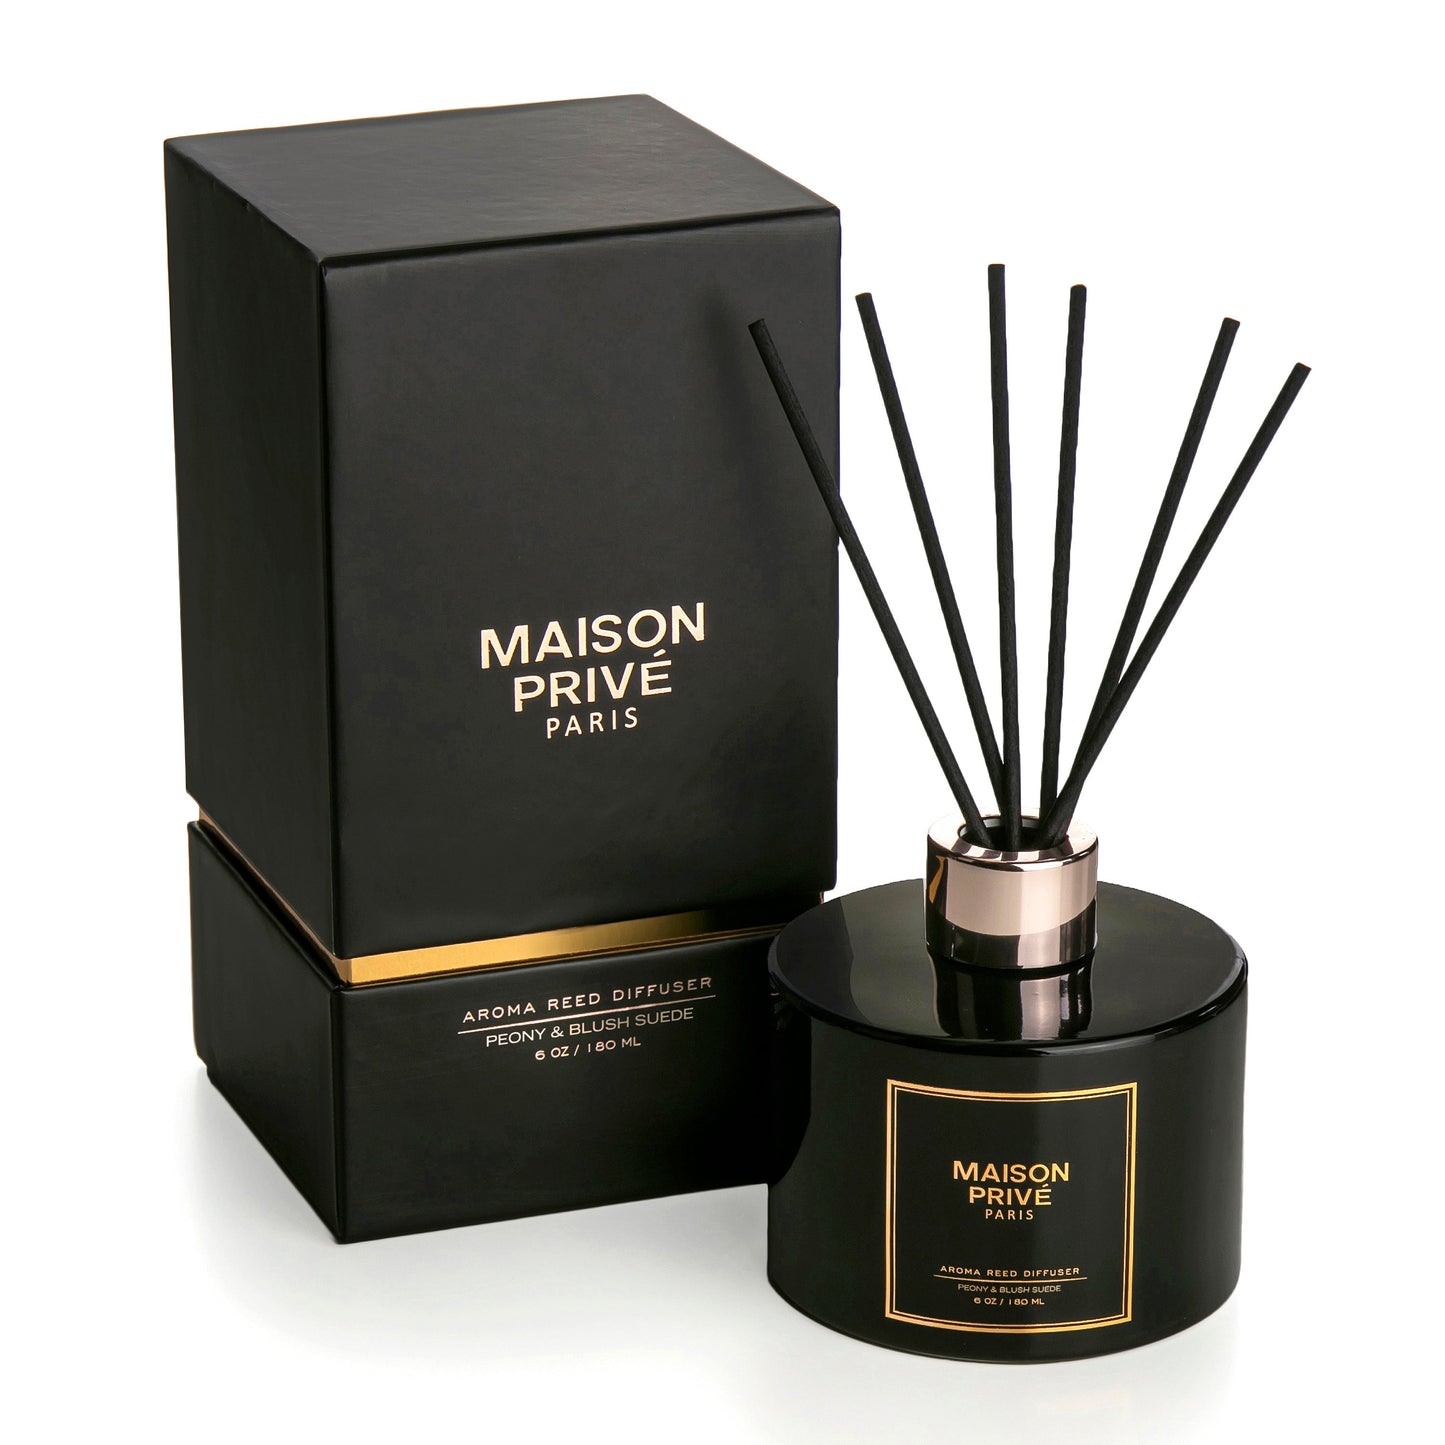 Peony & Blush Suede | Reed diffuser | 180ml